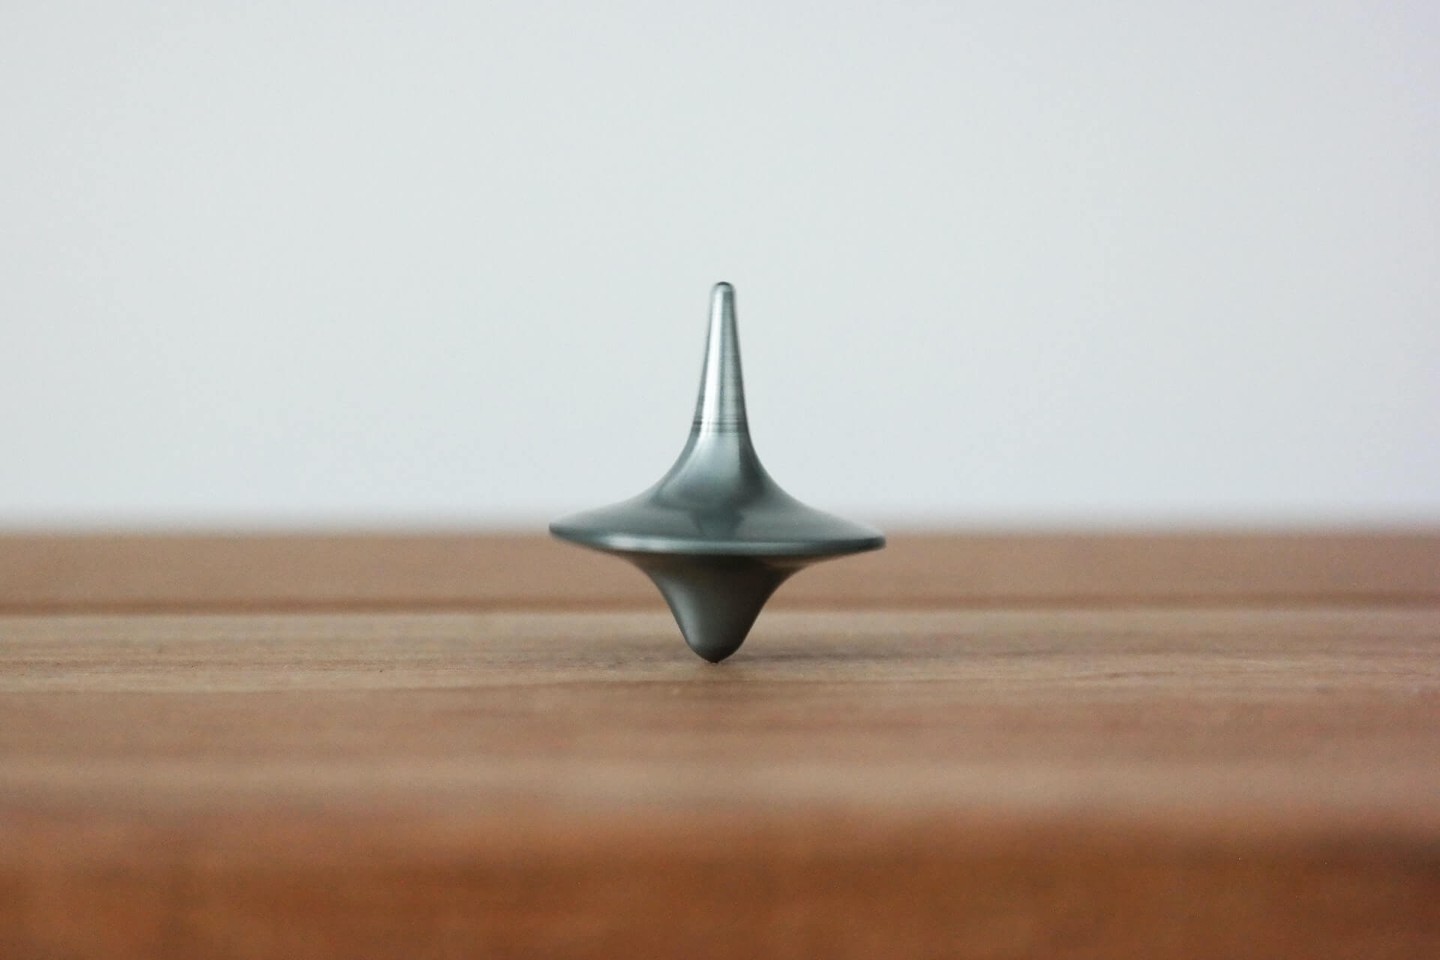 Spinning top balancing on a desk